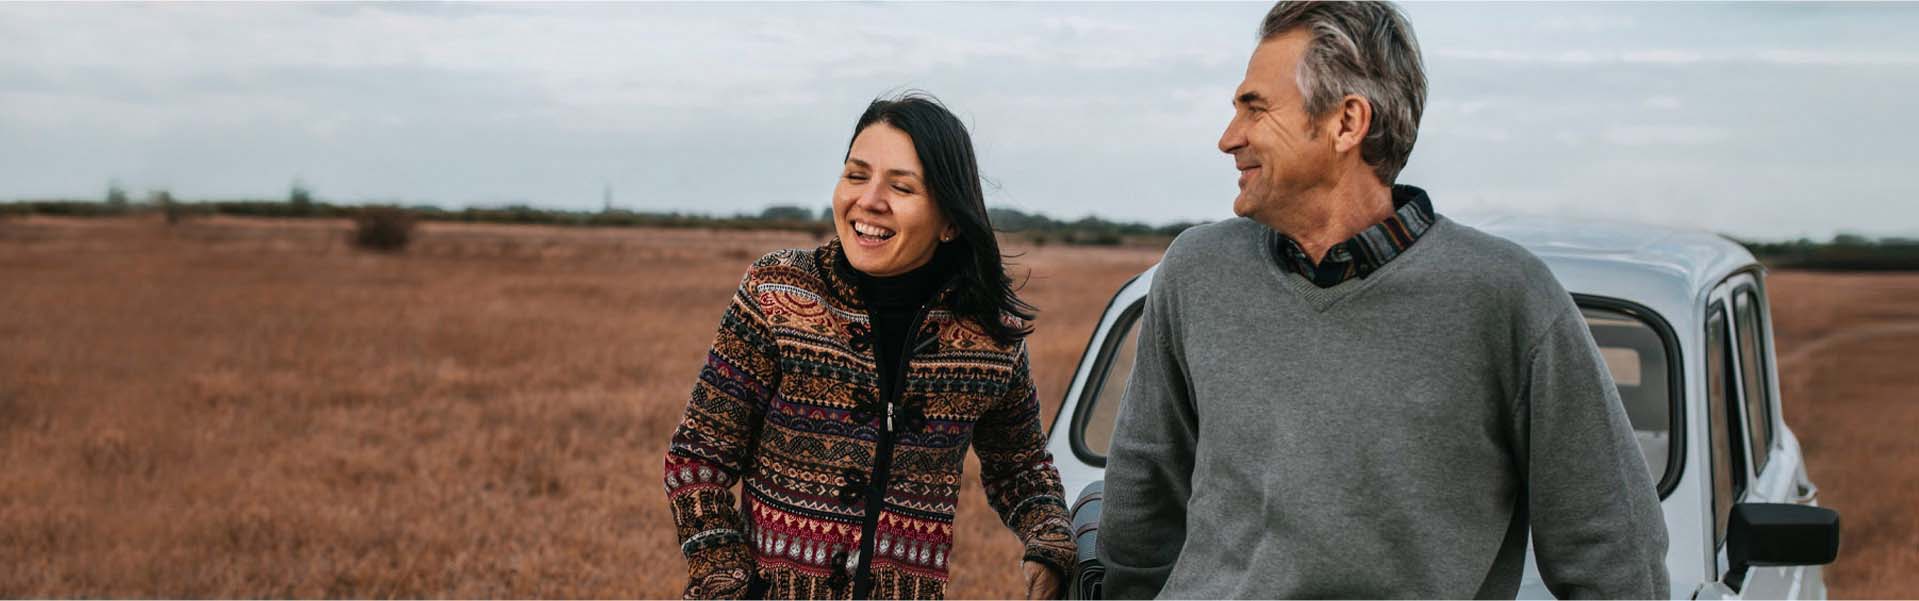 Relaxed, laughing couple with their car in a field.